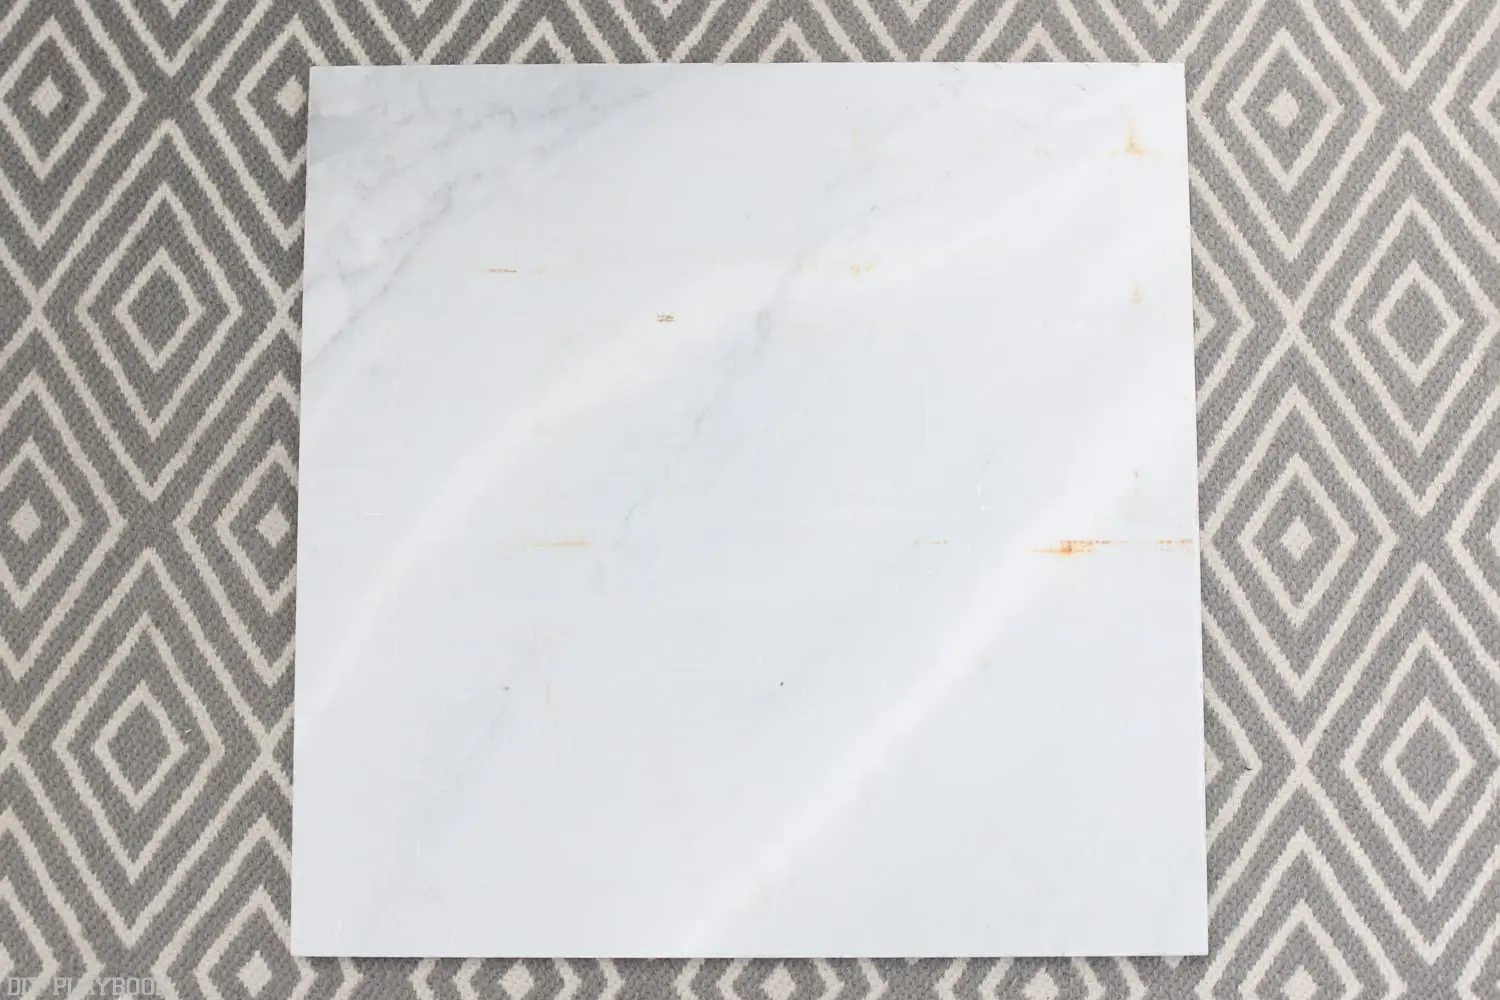 This marble is the starting point for the table